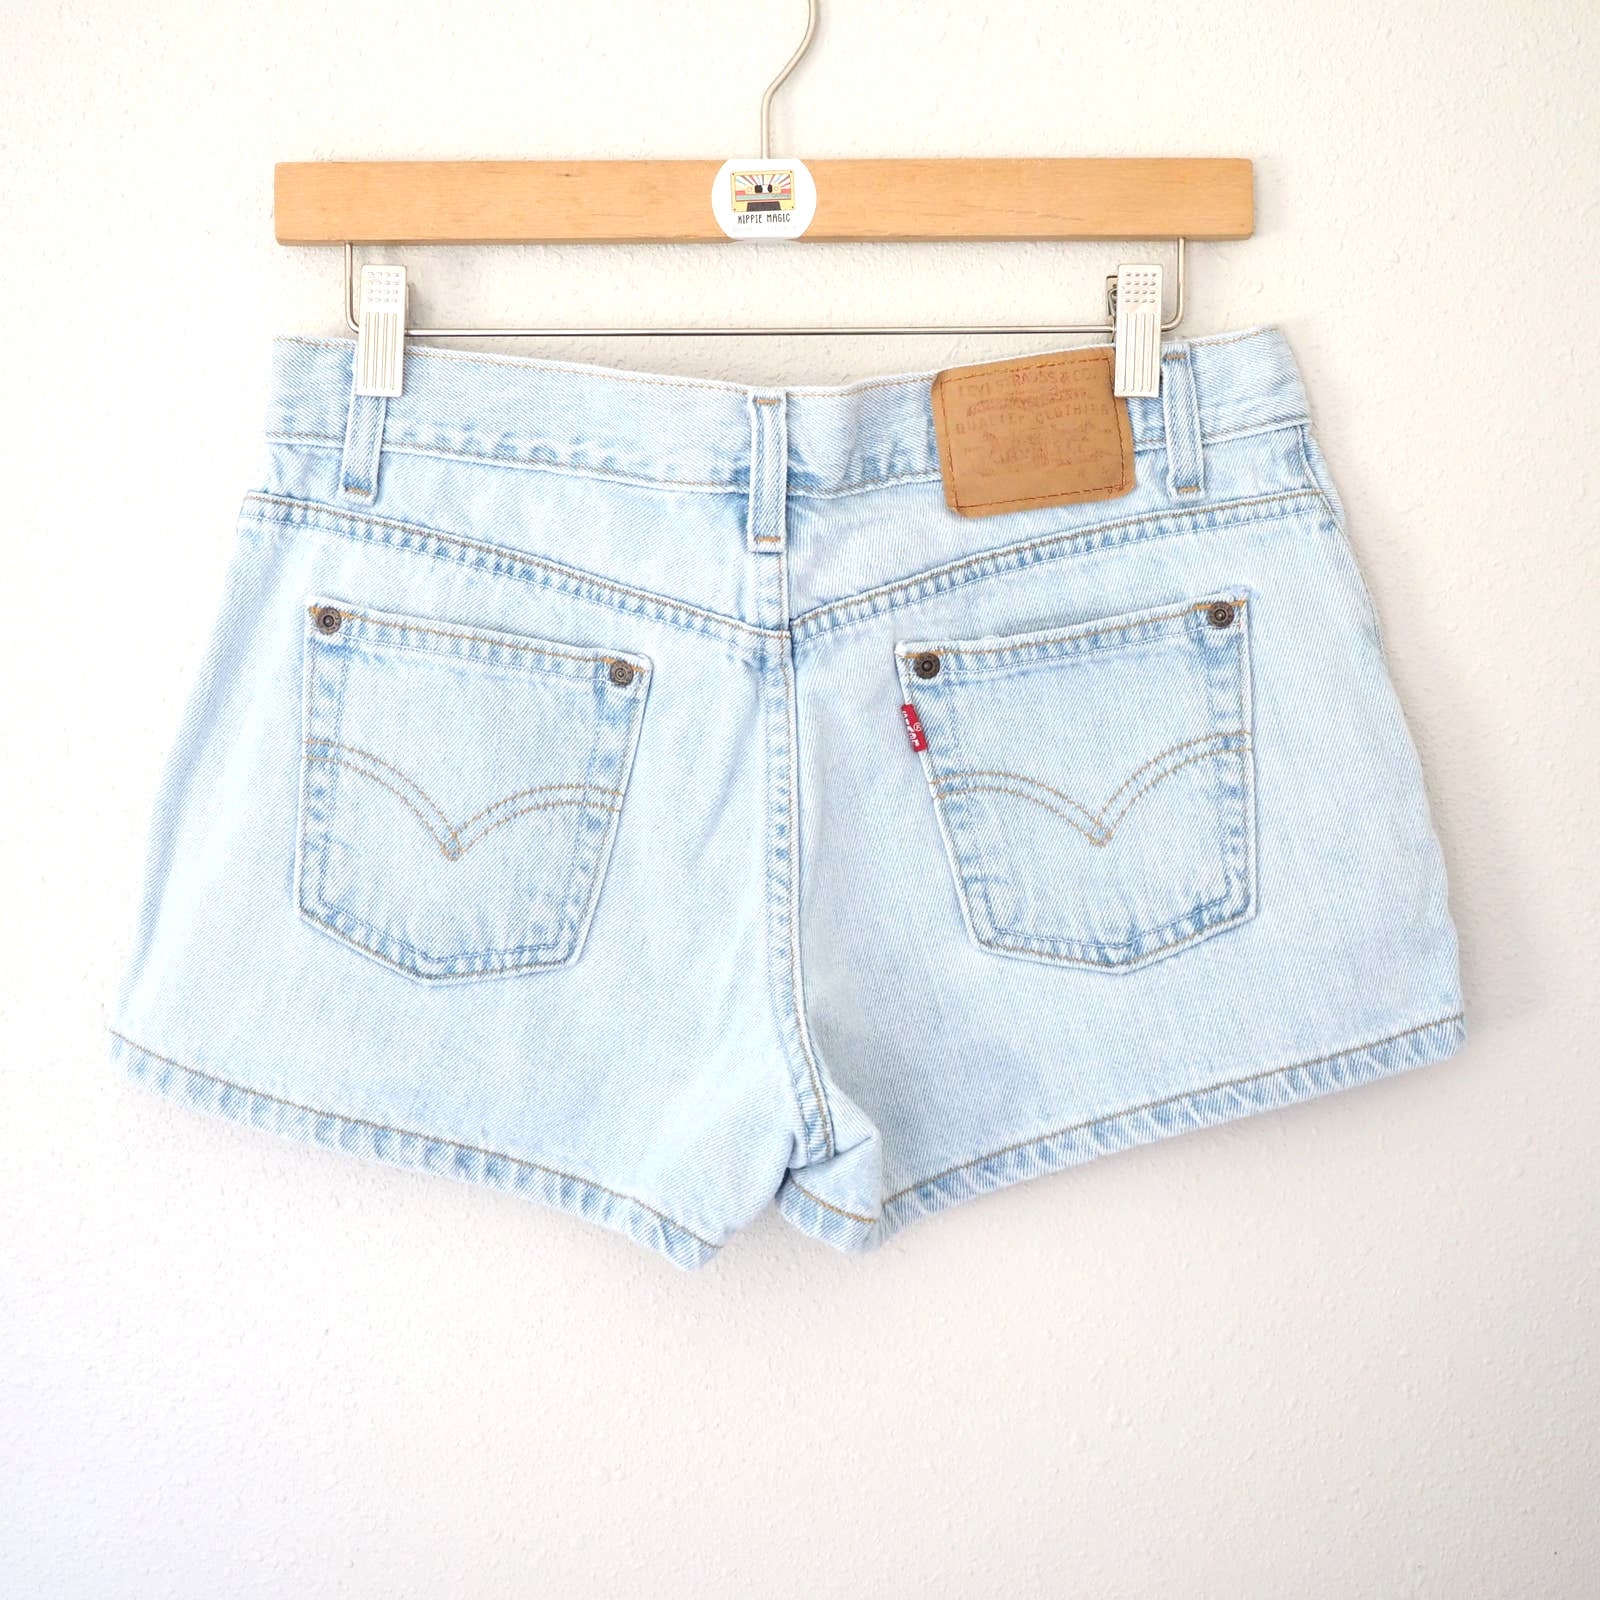 Angel's Y2K Low Rise Shorts in Light Wash! Totally